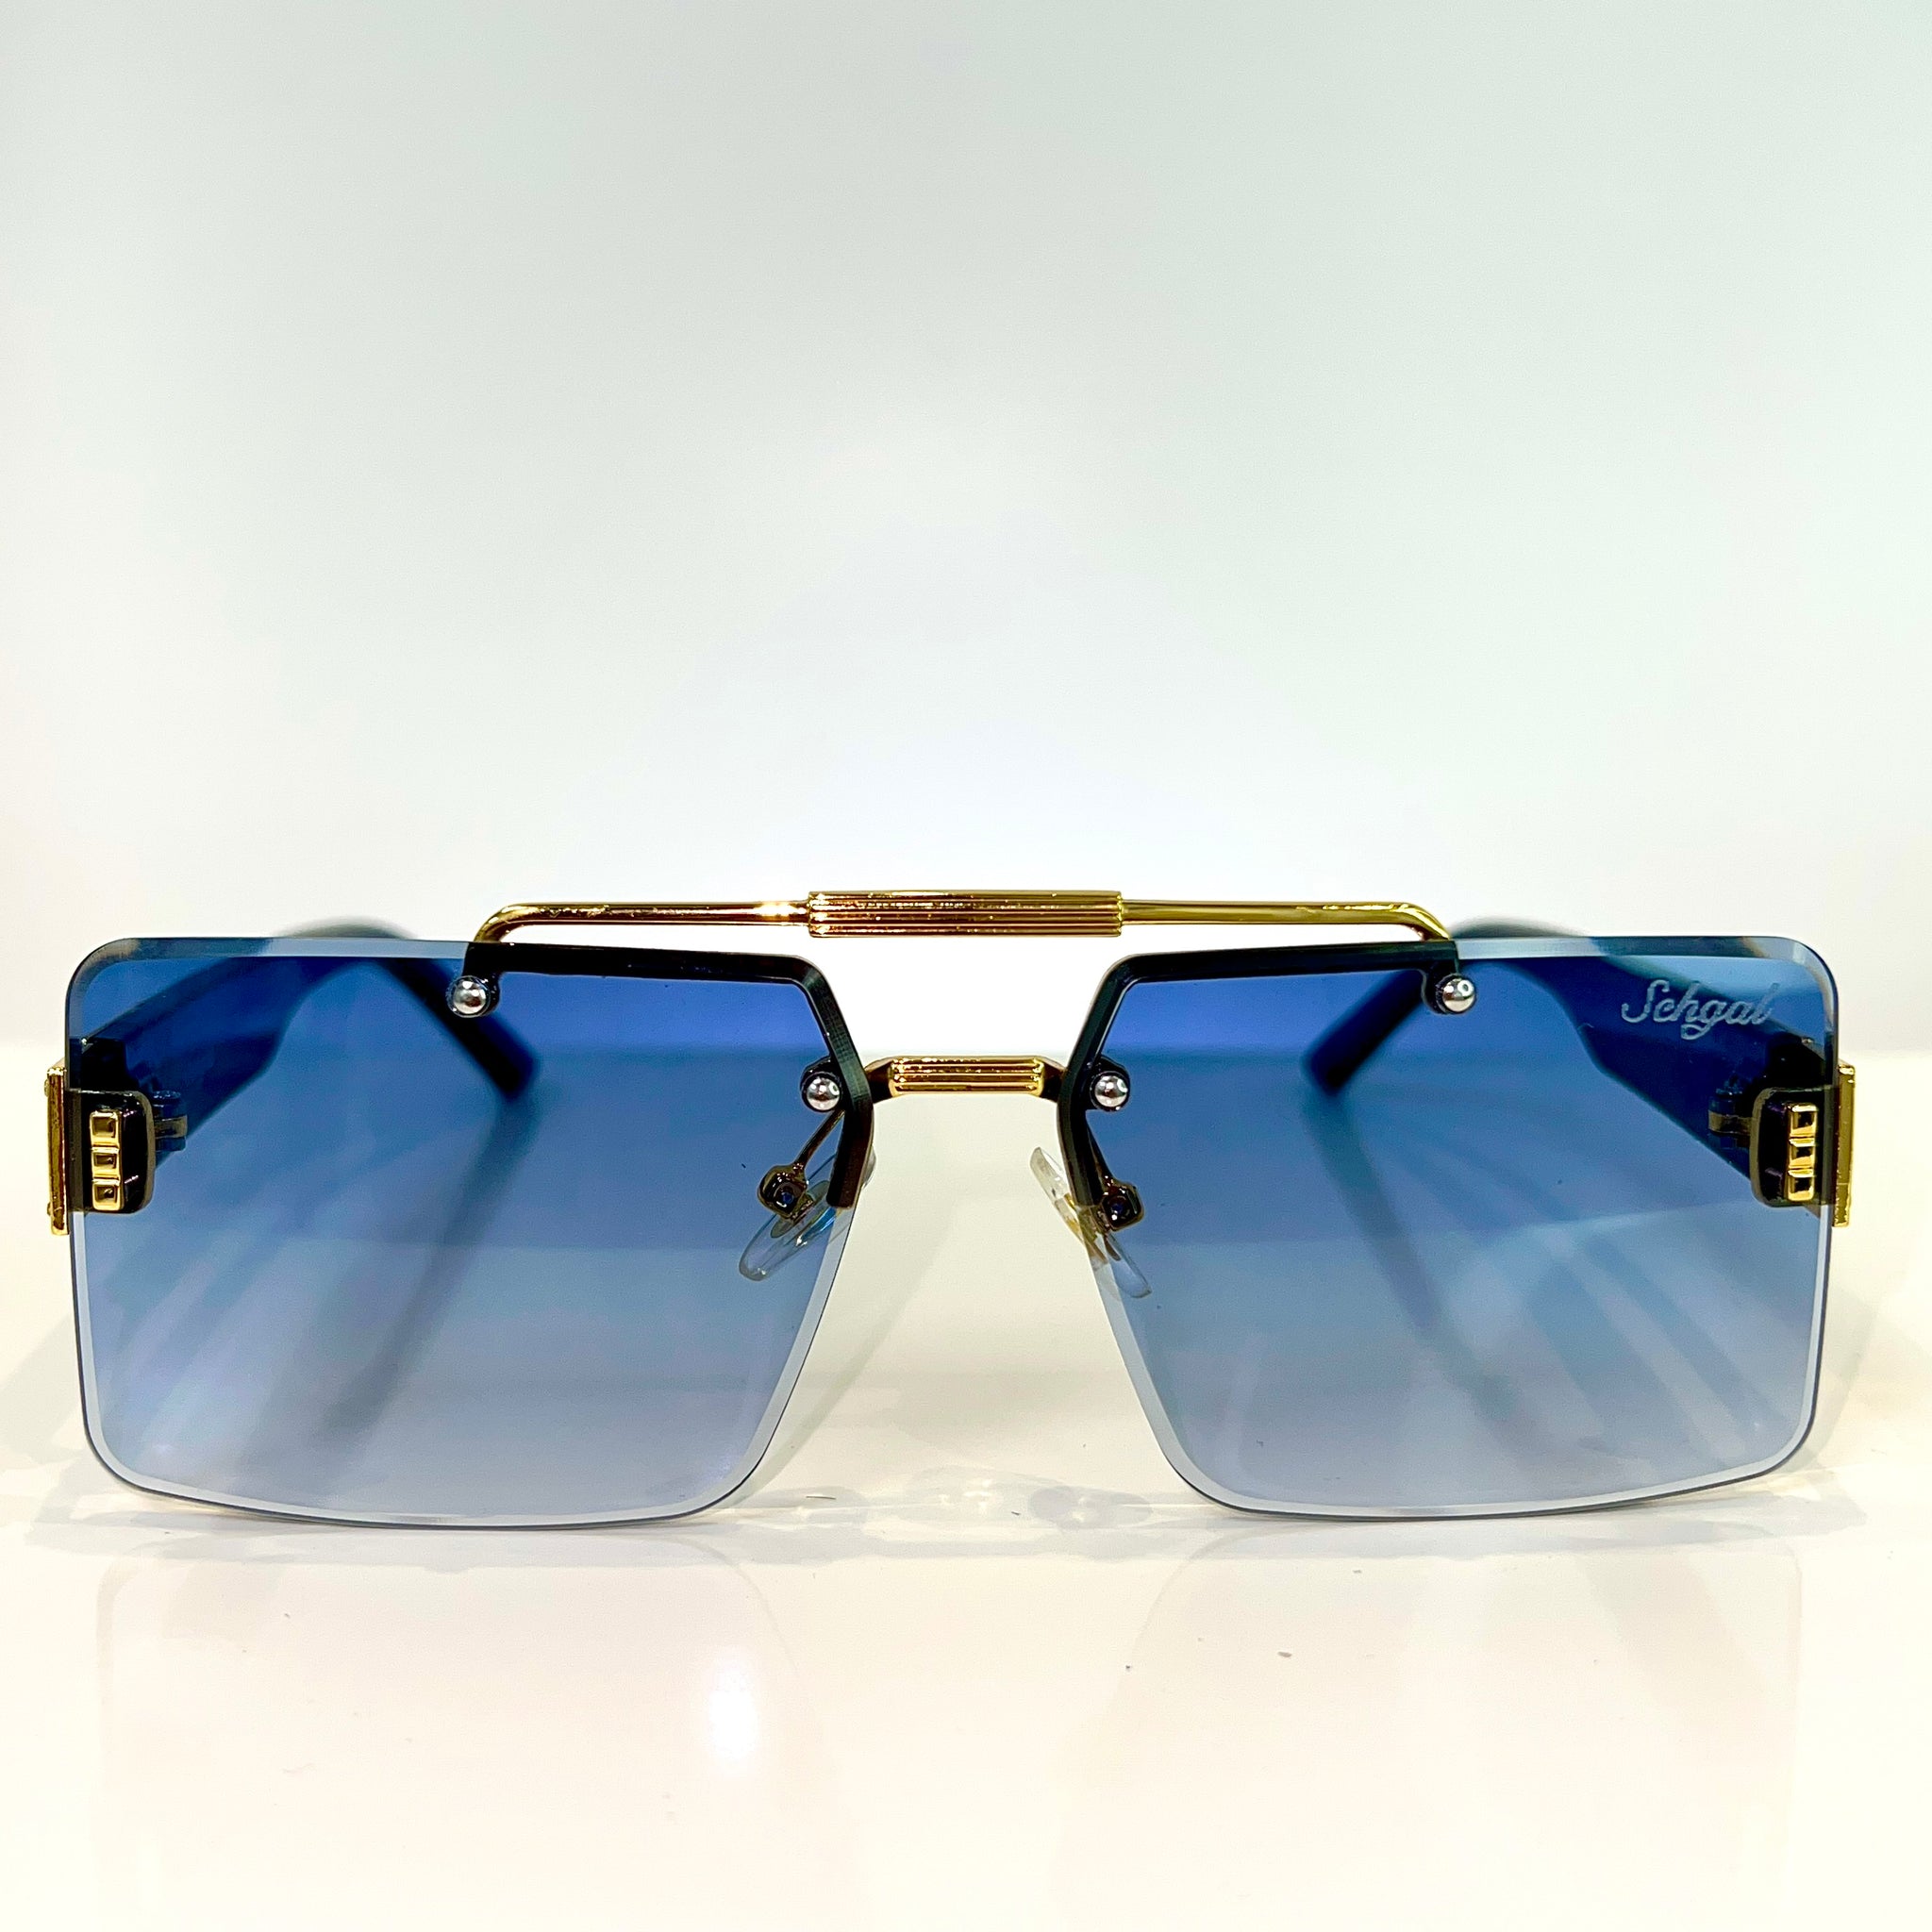 Project X Glasses - Blue Shade